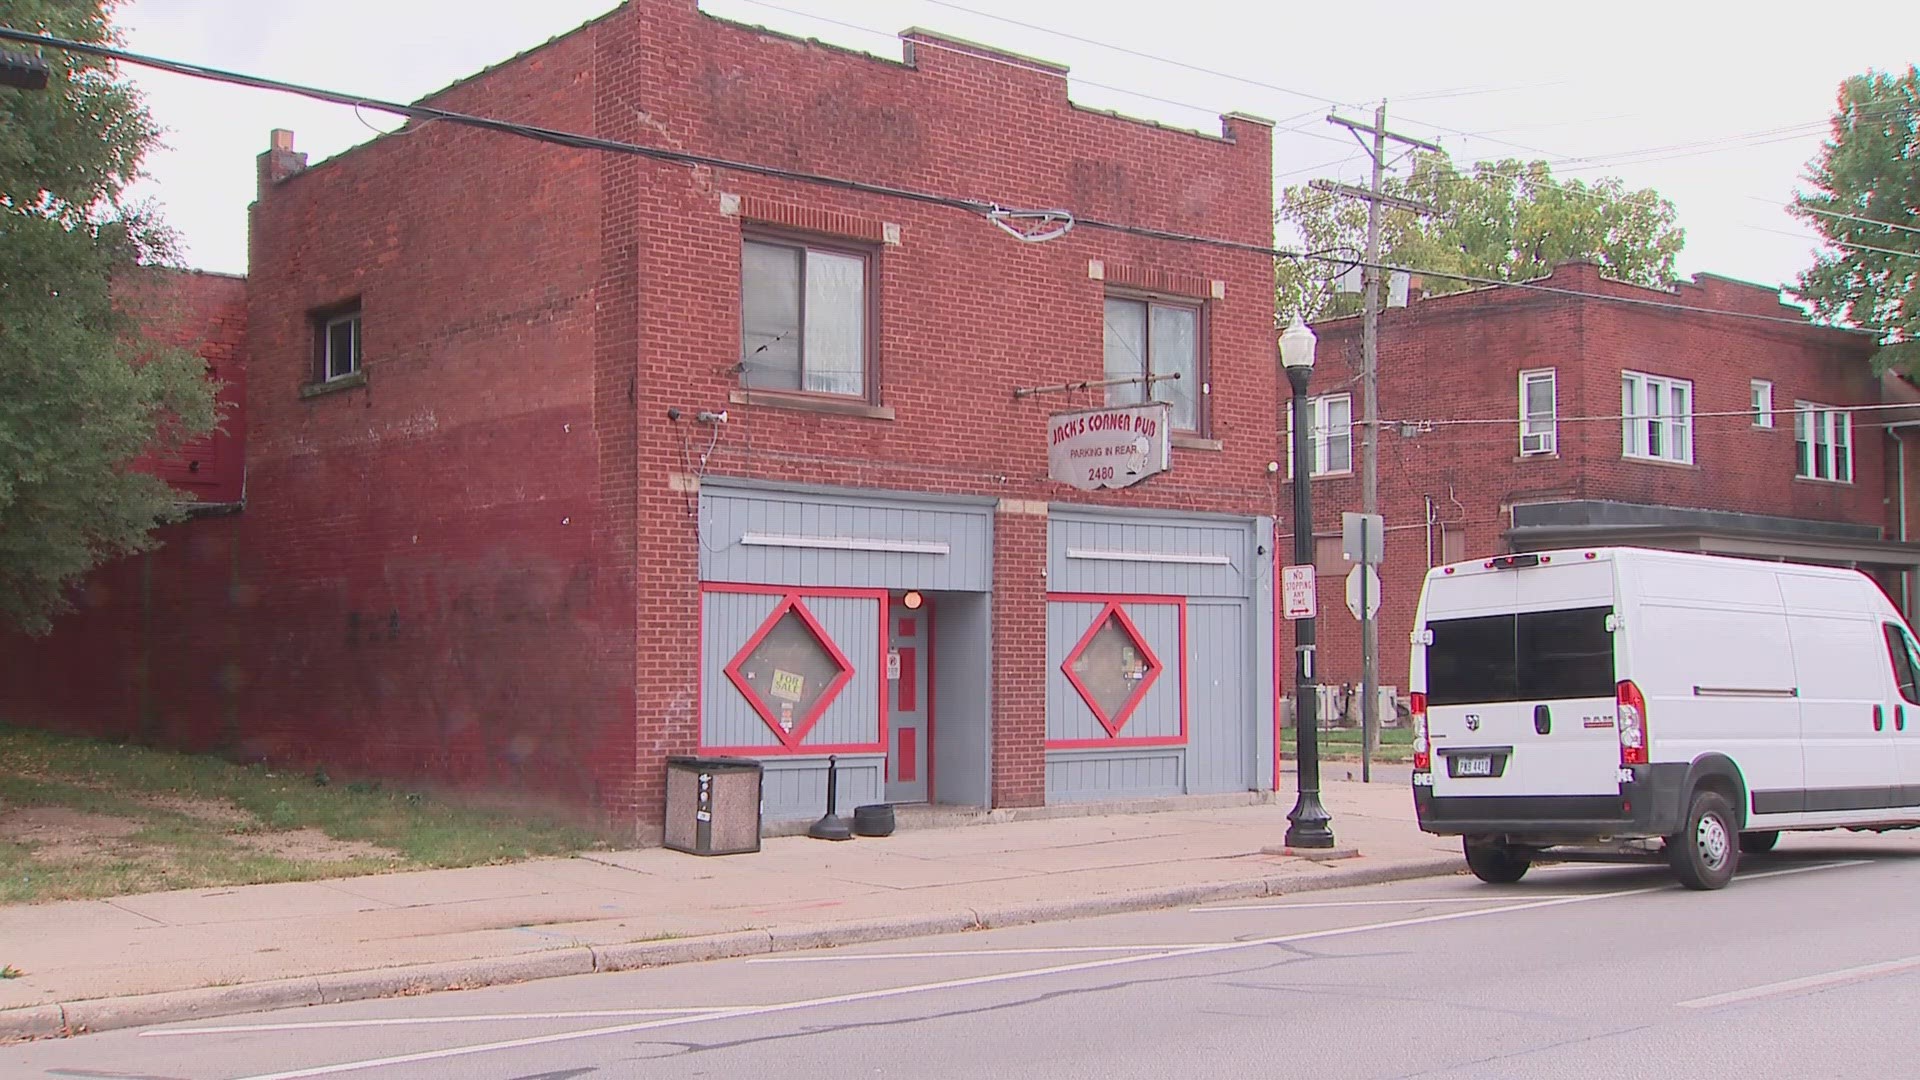 People living in the area told 10TV that they’re tired of the drama around the bar.